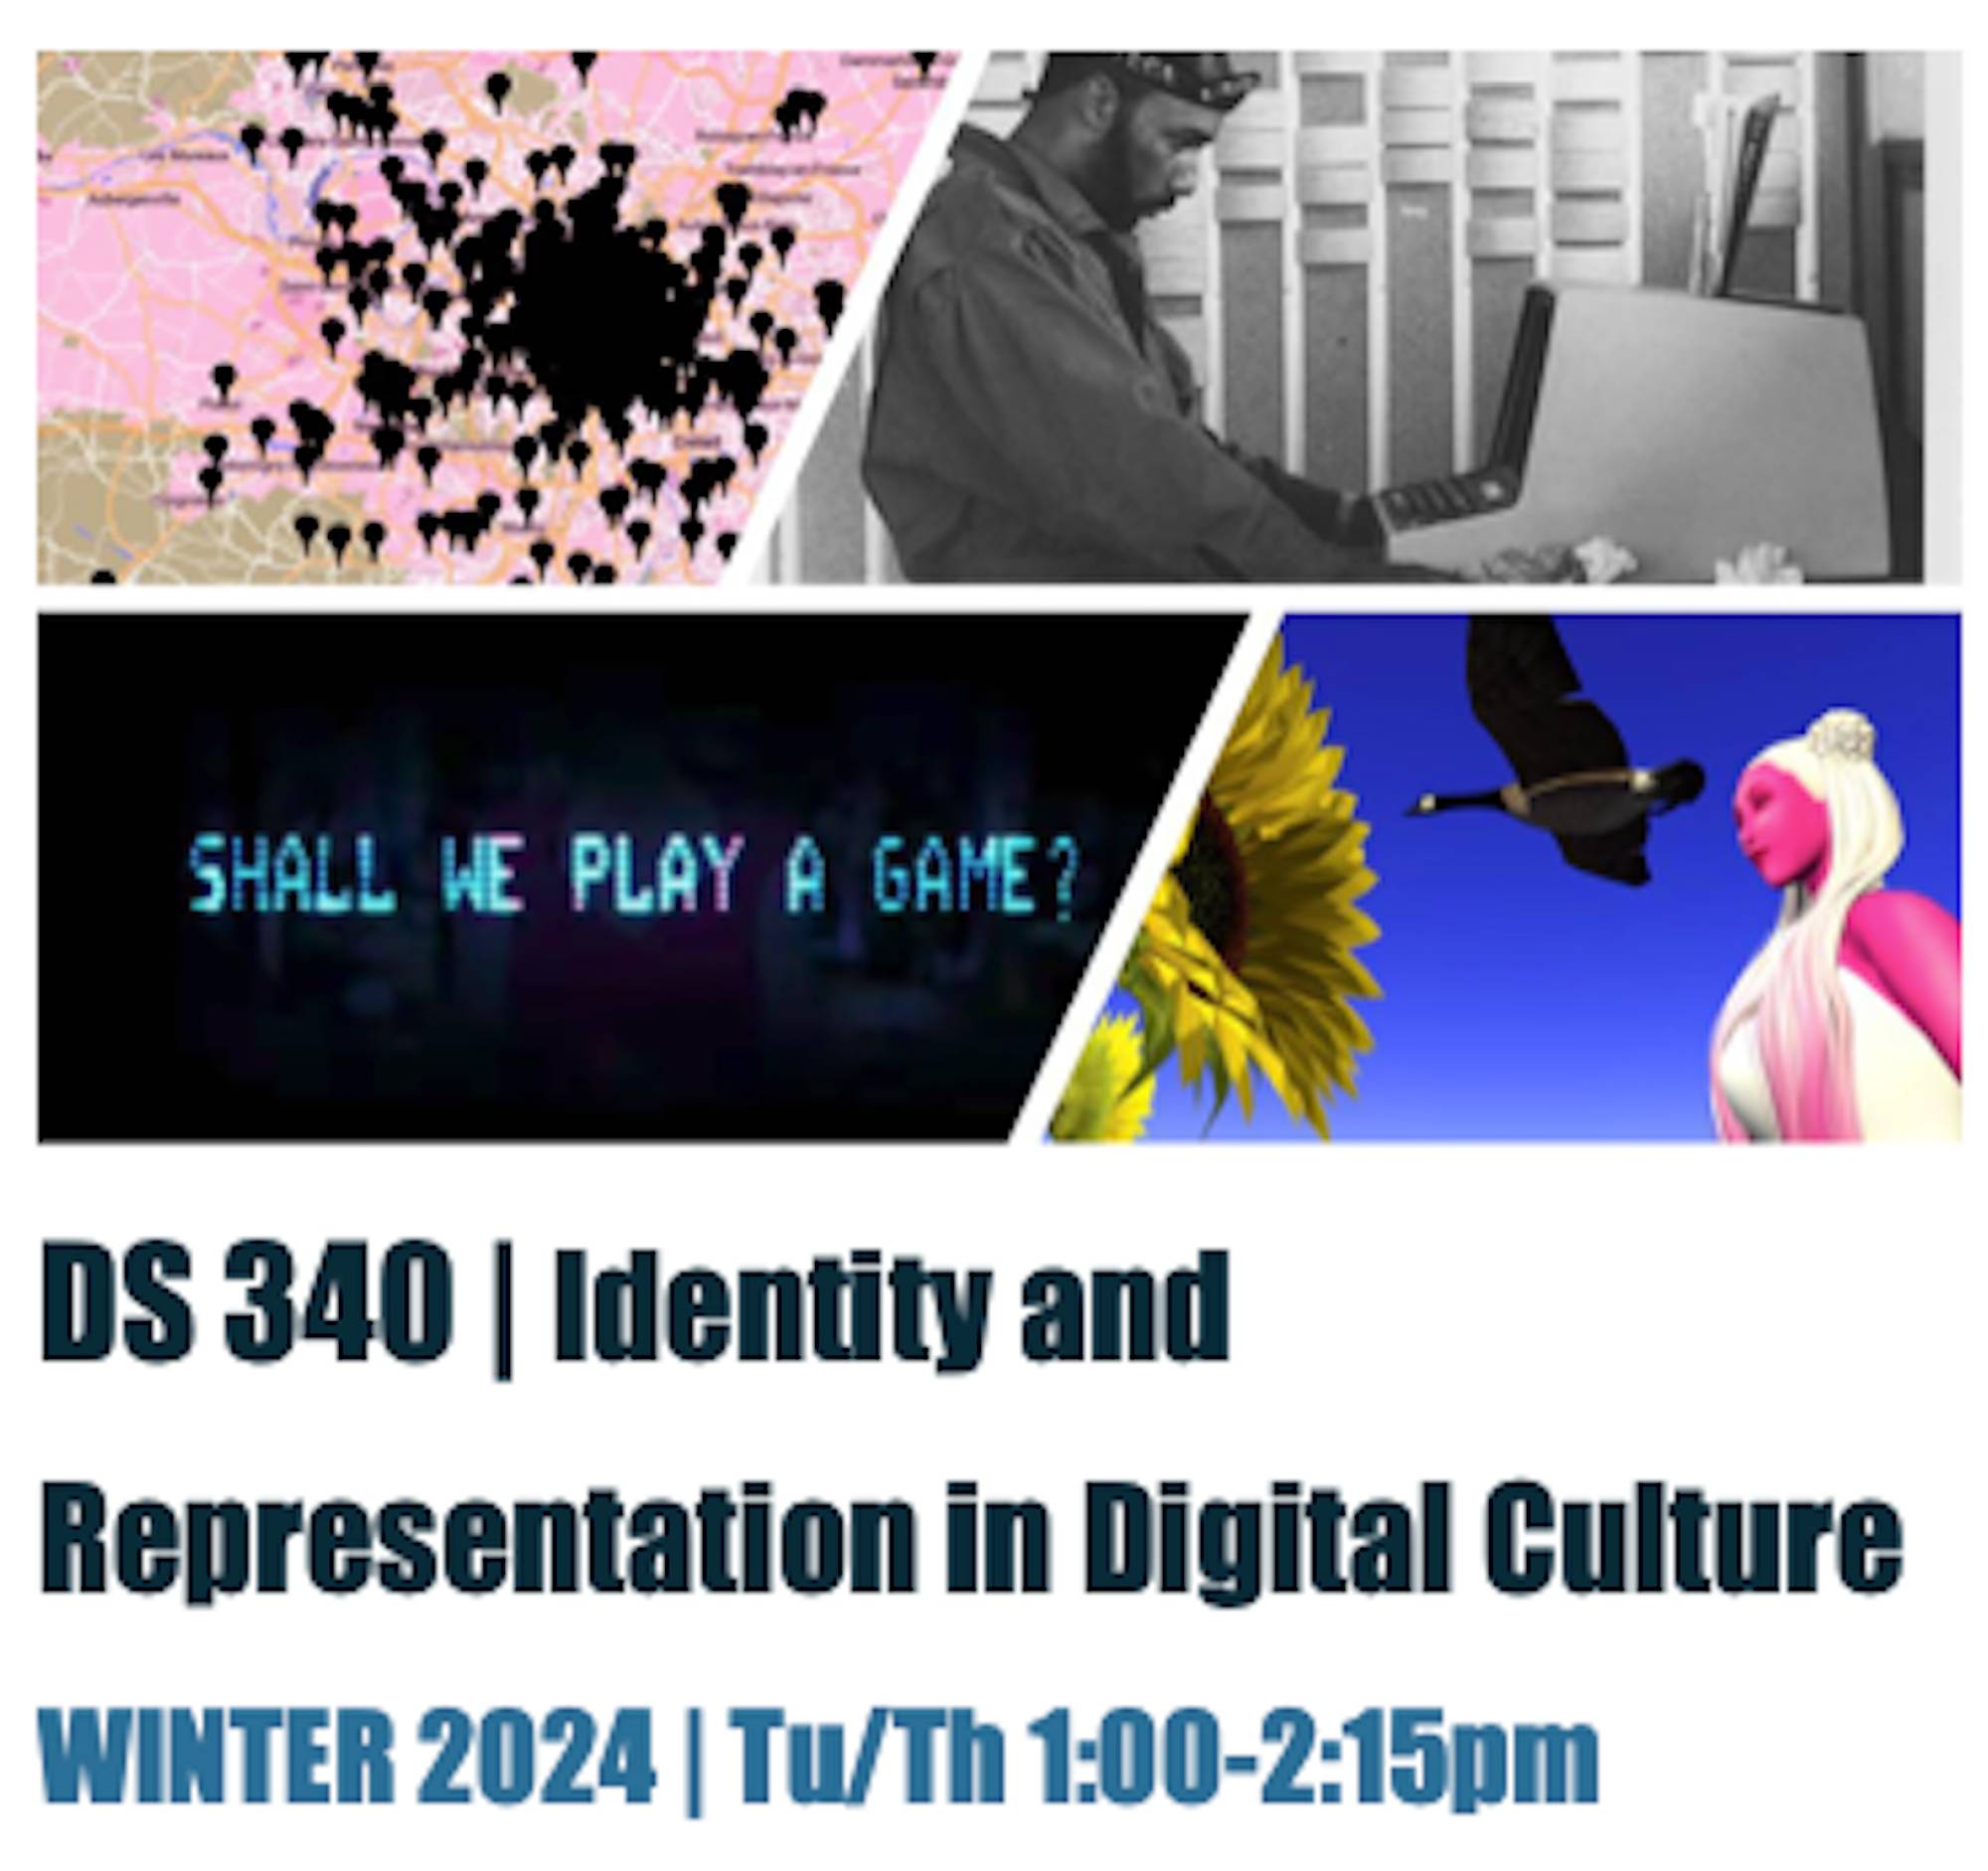 Promotional flier for DS 340, Identity and Representation in Digital Culture